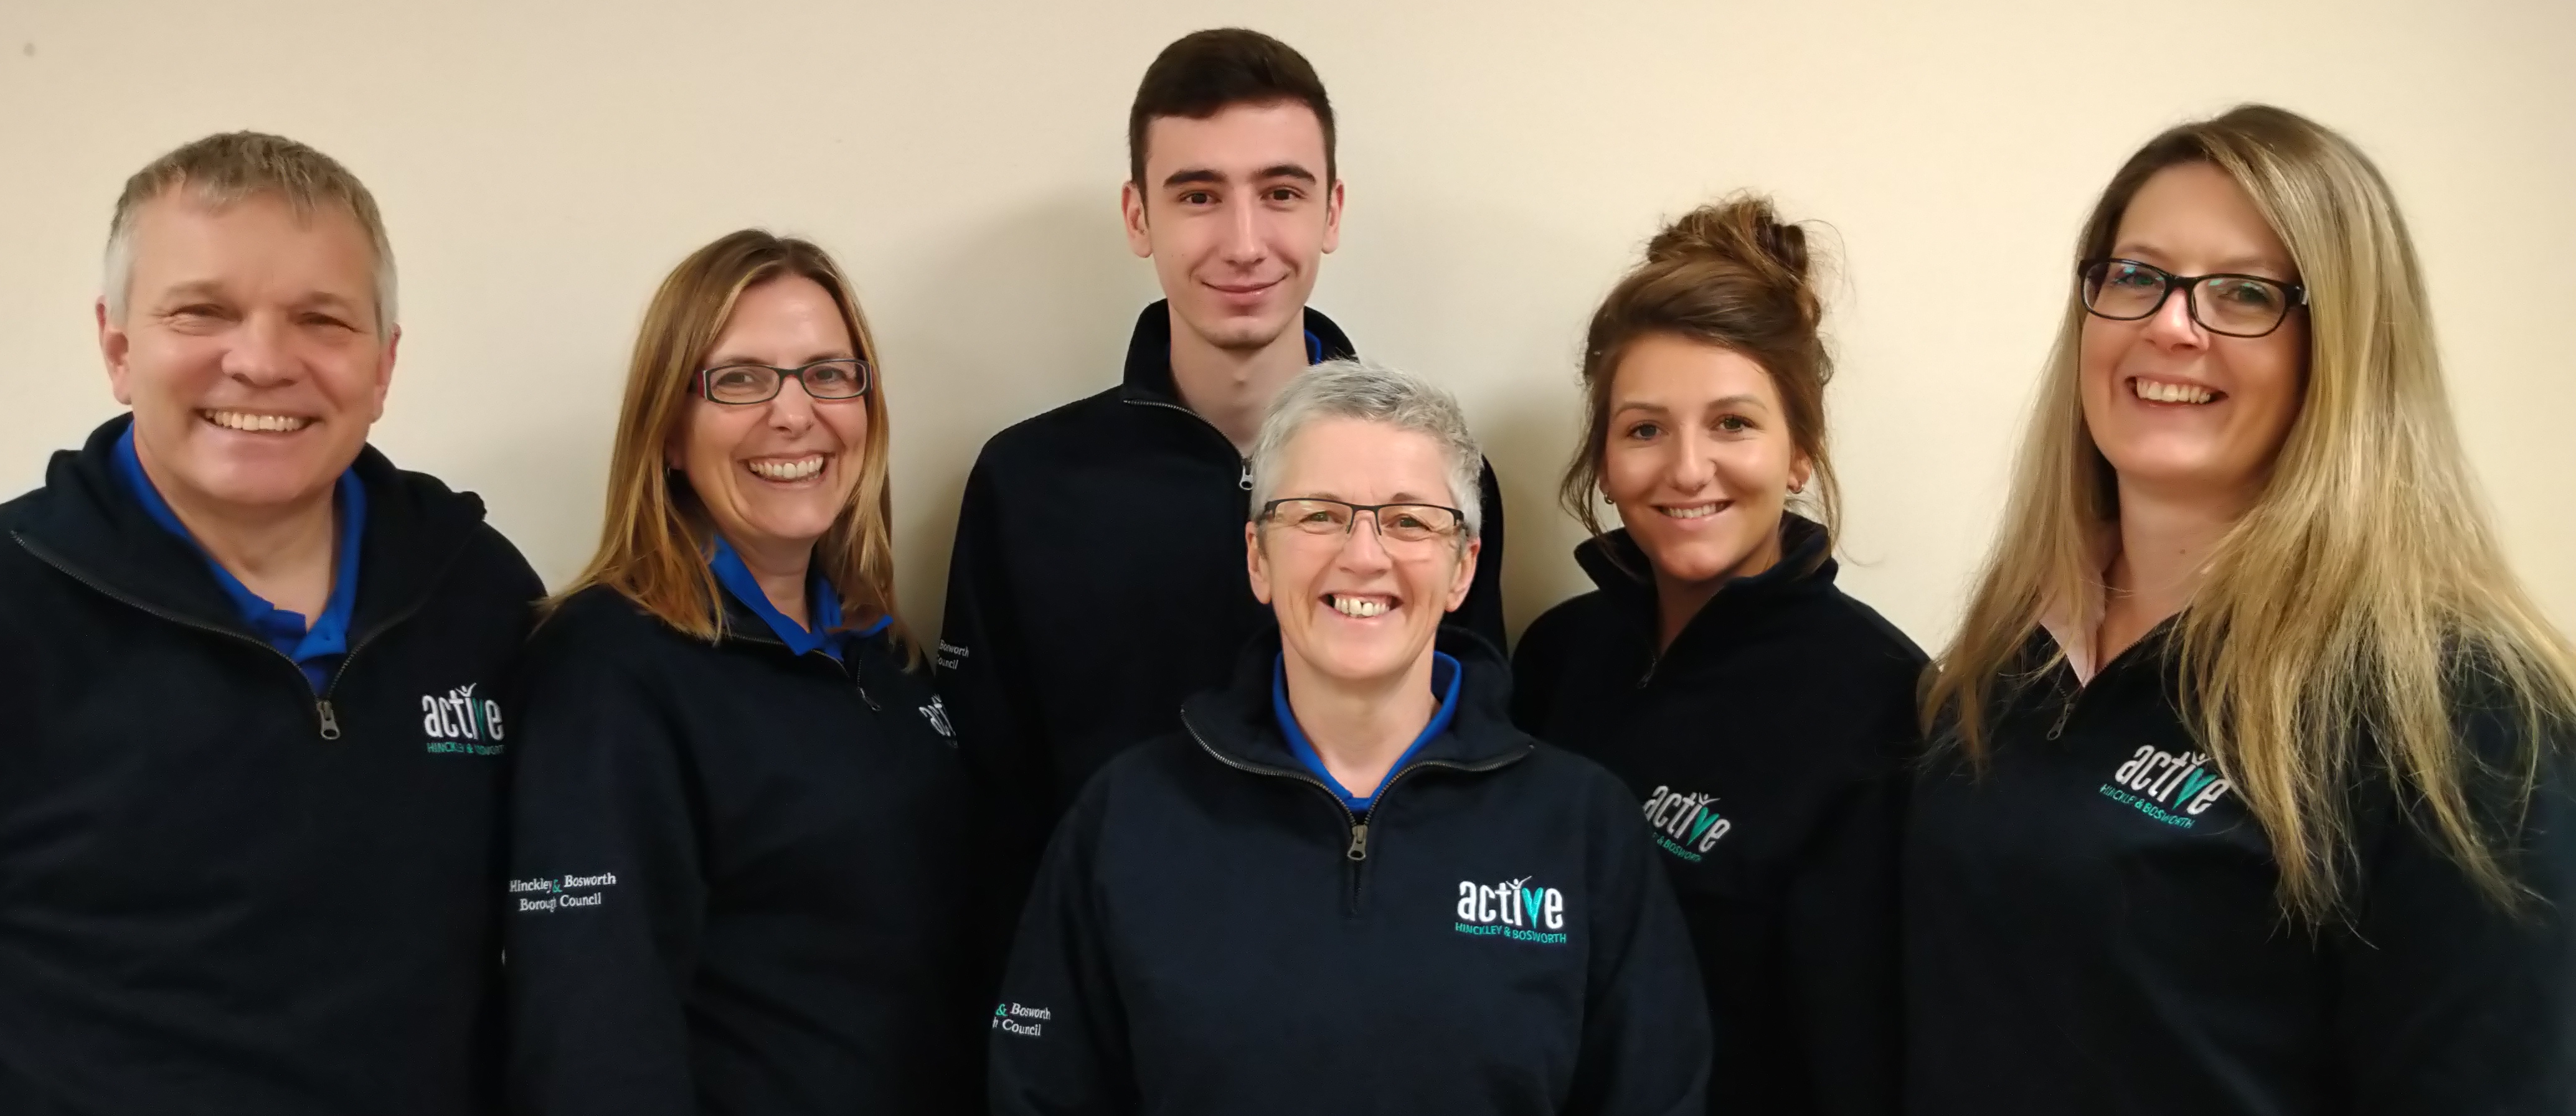 Your local Physical Activity, Health & Wellbeing Team